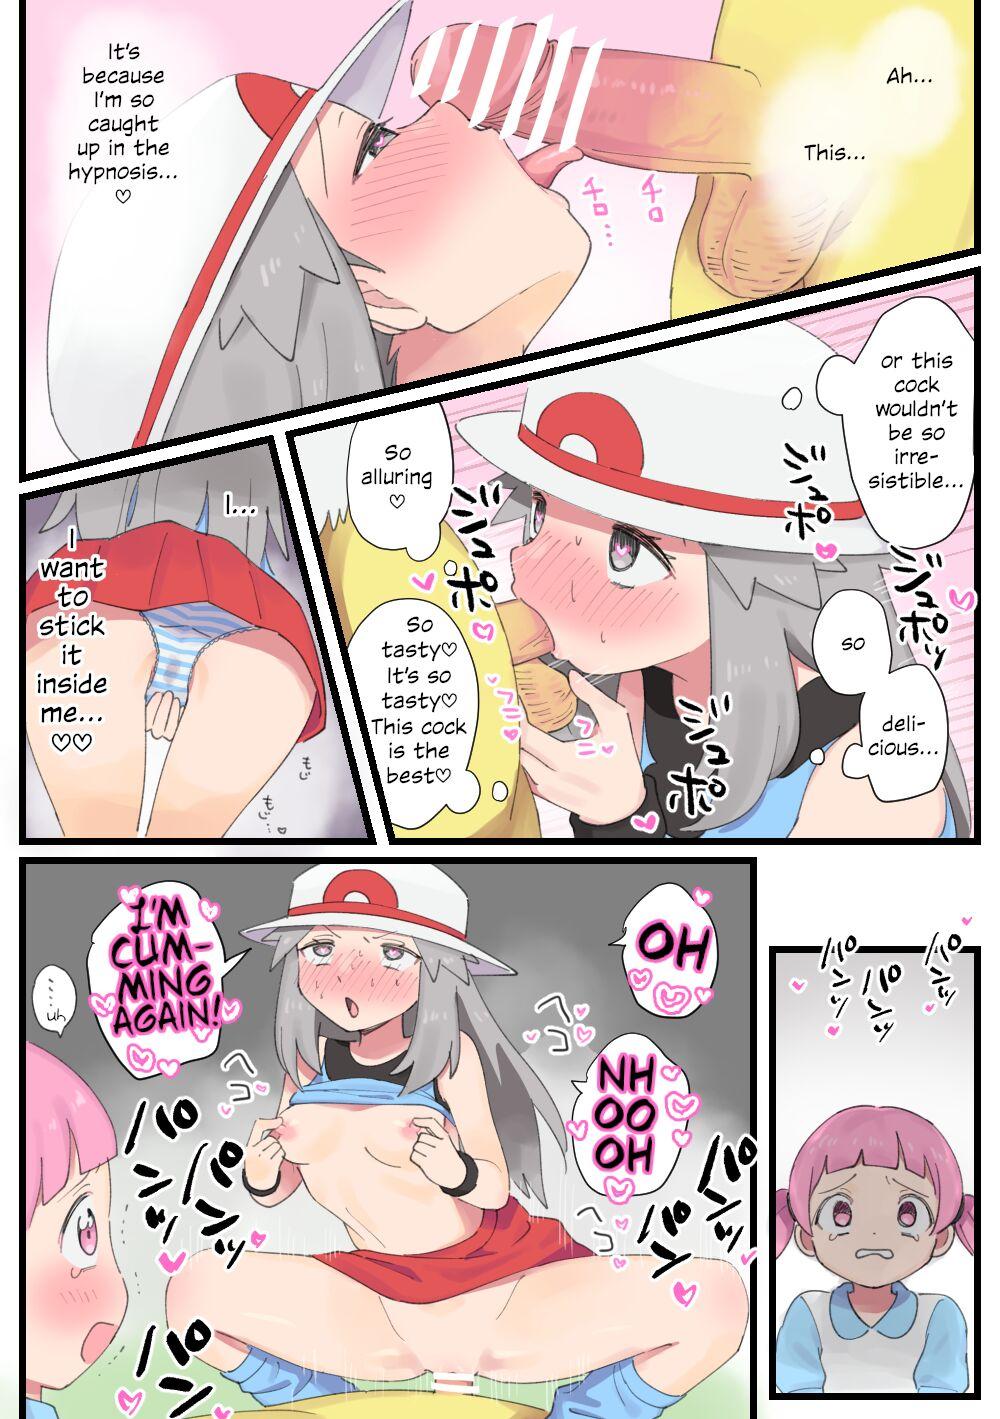 Hardcore Fucking Leaf goes to help Mayo-chan and gets hypnotically raped by Hypno - Pokemon | pocket monsters Japan - Page 3